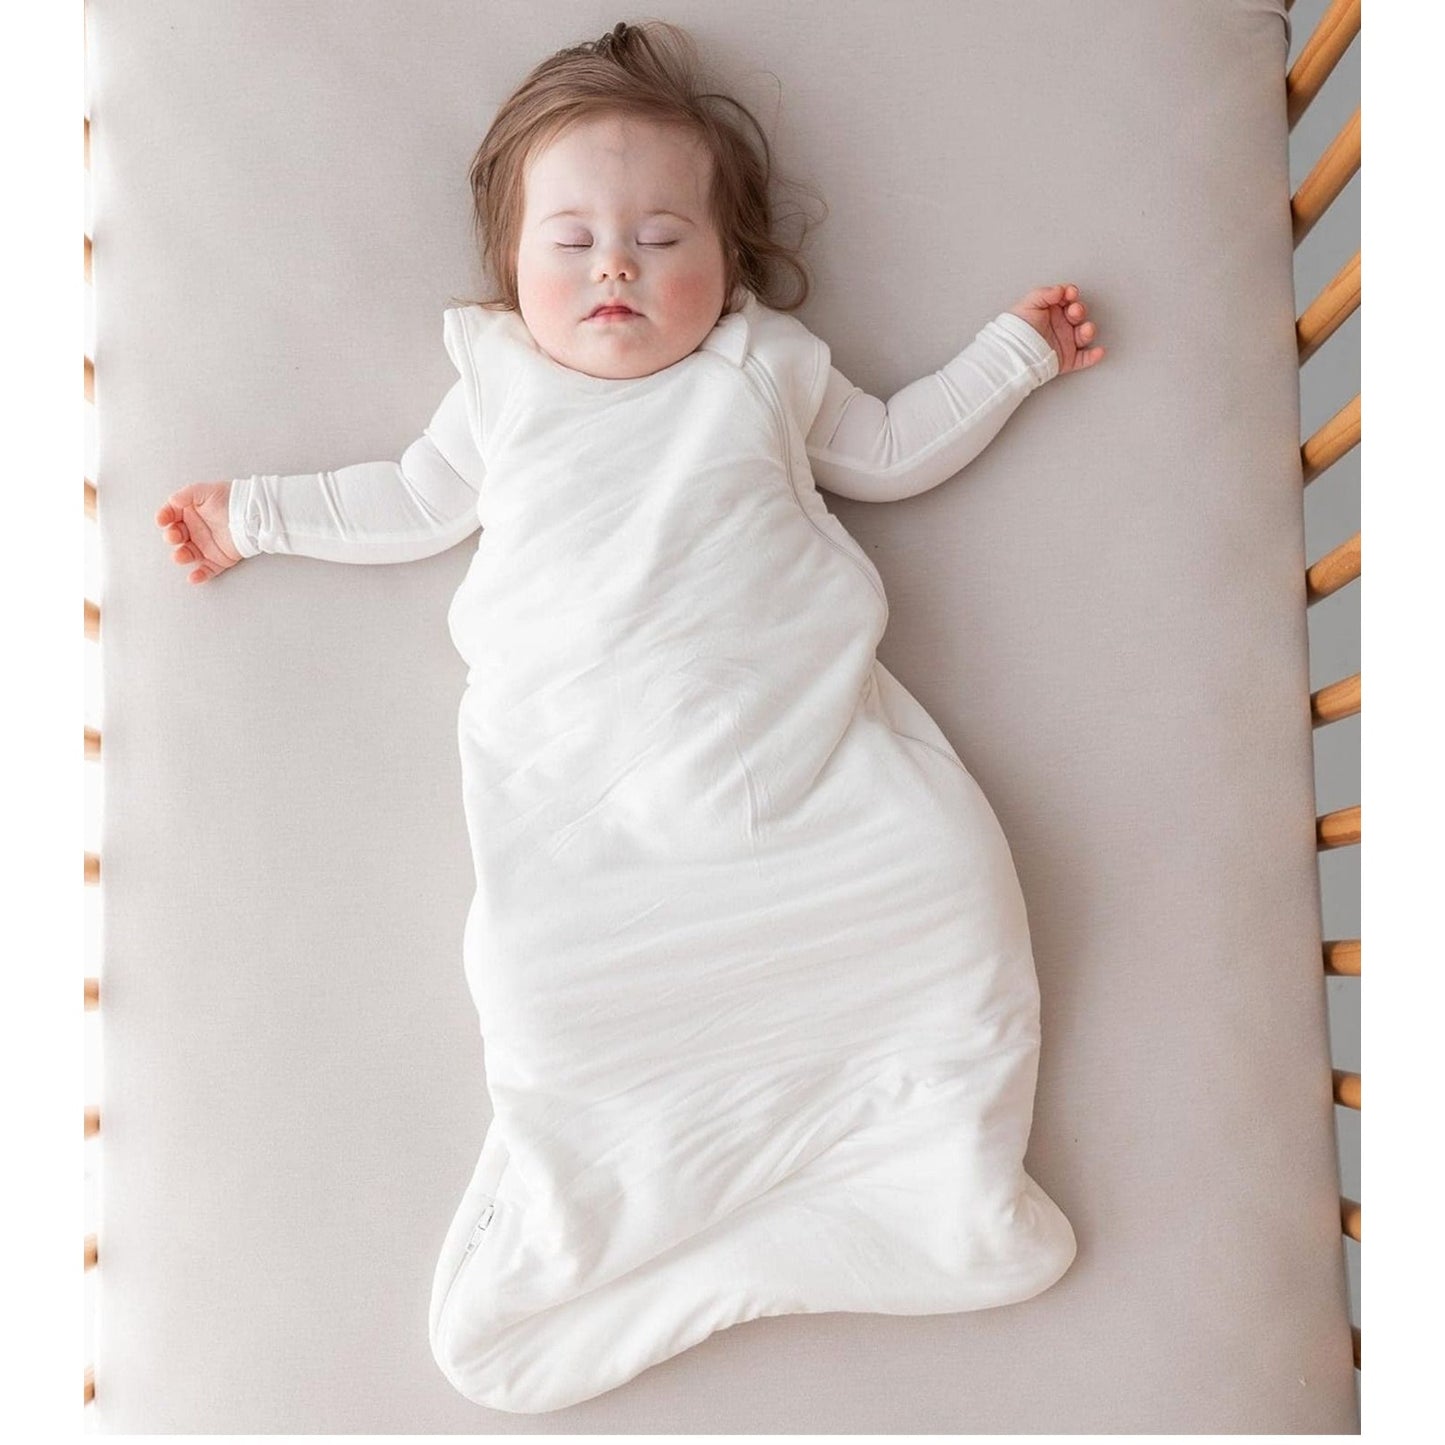 KYTE BABY 1.0 Tog Sleeping Bag for Babies and Toddlers Small (14 - 20 lbs) White